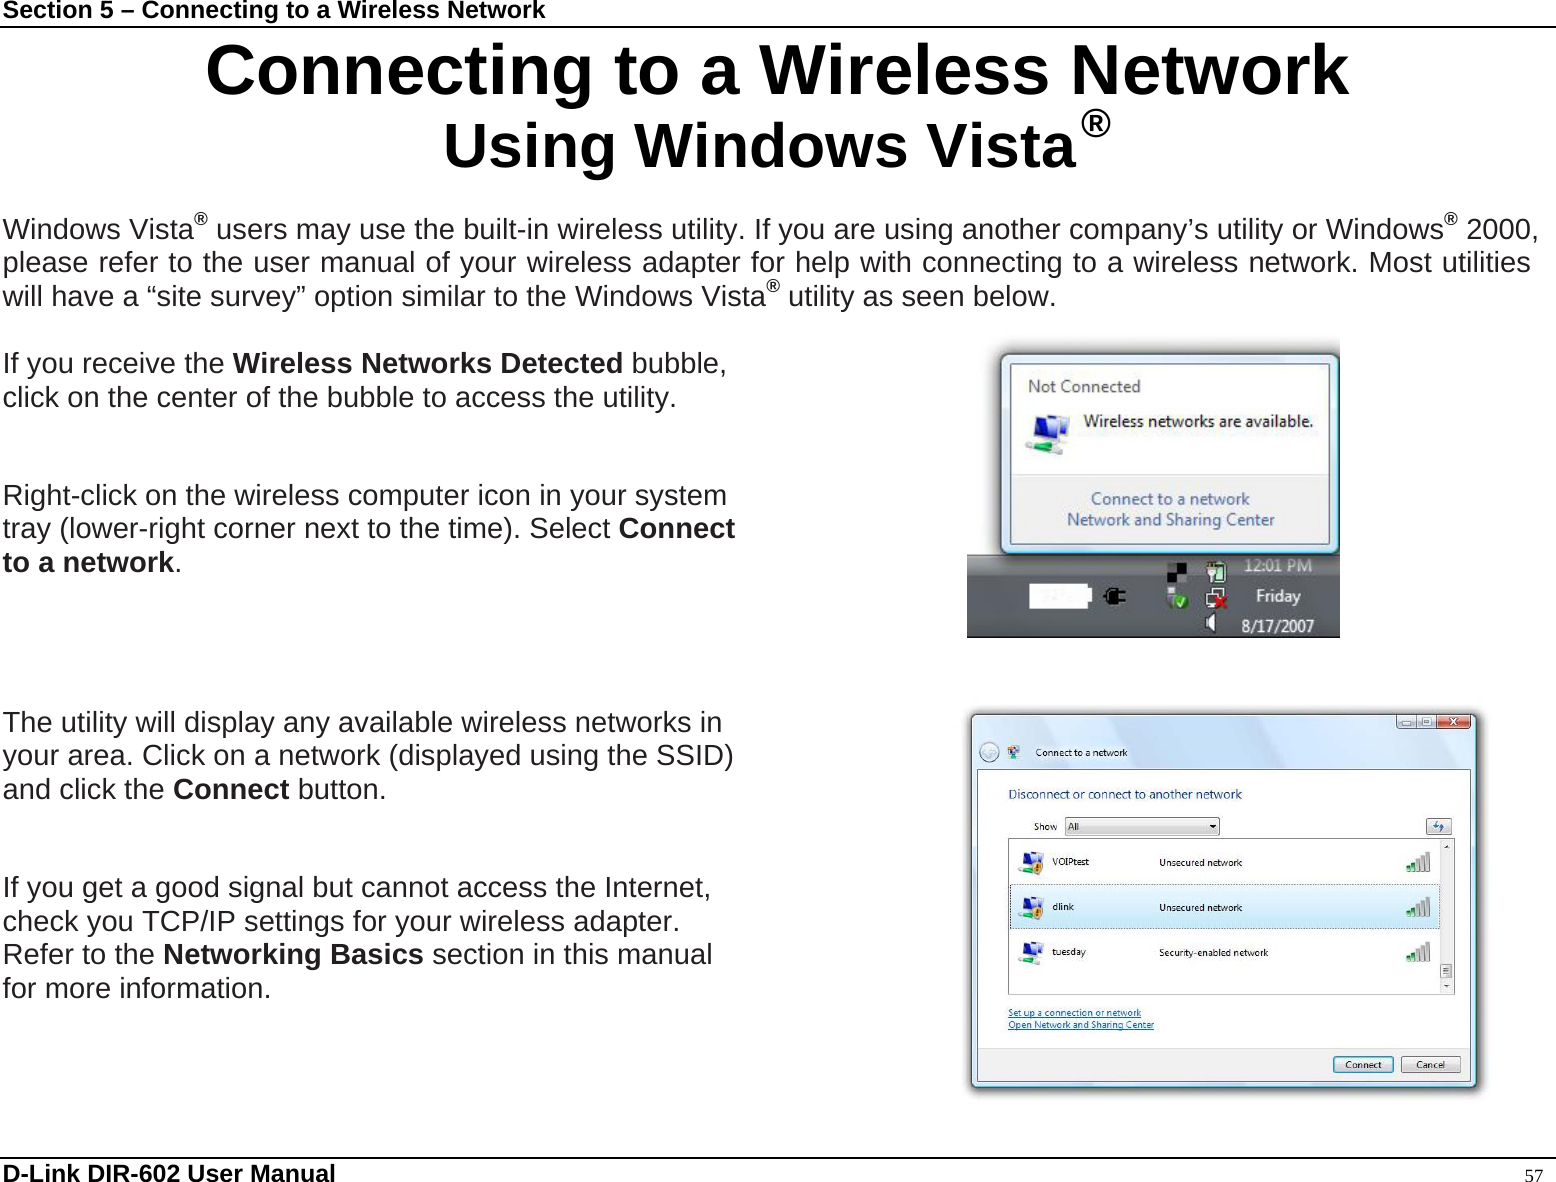 Section 5 – Connecting to a Wireless Network Connecting to a Wireless Network Using Windows Vista ®  Windows Vista® users may use the built-in wireless utility. If you are using another company’s utility or Windows® 2000, please refer to the user manual of your wireless adapter for help with connecting to a wireless network. Most utilities will have a “site survey” option similar to the Windows Vista® utility as seen below.   D-Link DIR-602 User Manual                                                                                               57 If you receive the Wireless Networks Detected bubble,  click on the center of the bubble to access the utility.        or Right-click on the wireless computer icon in your system   tray (lower-right corner next to the time). Select Connect  to a network.     The utility will display any available wireless networks in   your area. Click on a network (displayed using the SSID)   and click the Connect button.   If you get a good signal but cannot access the Internet,   check you TCP/IP settings for your wireless adapter.   Refer to the Networking Basics section in this manual   for more information.   